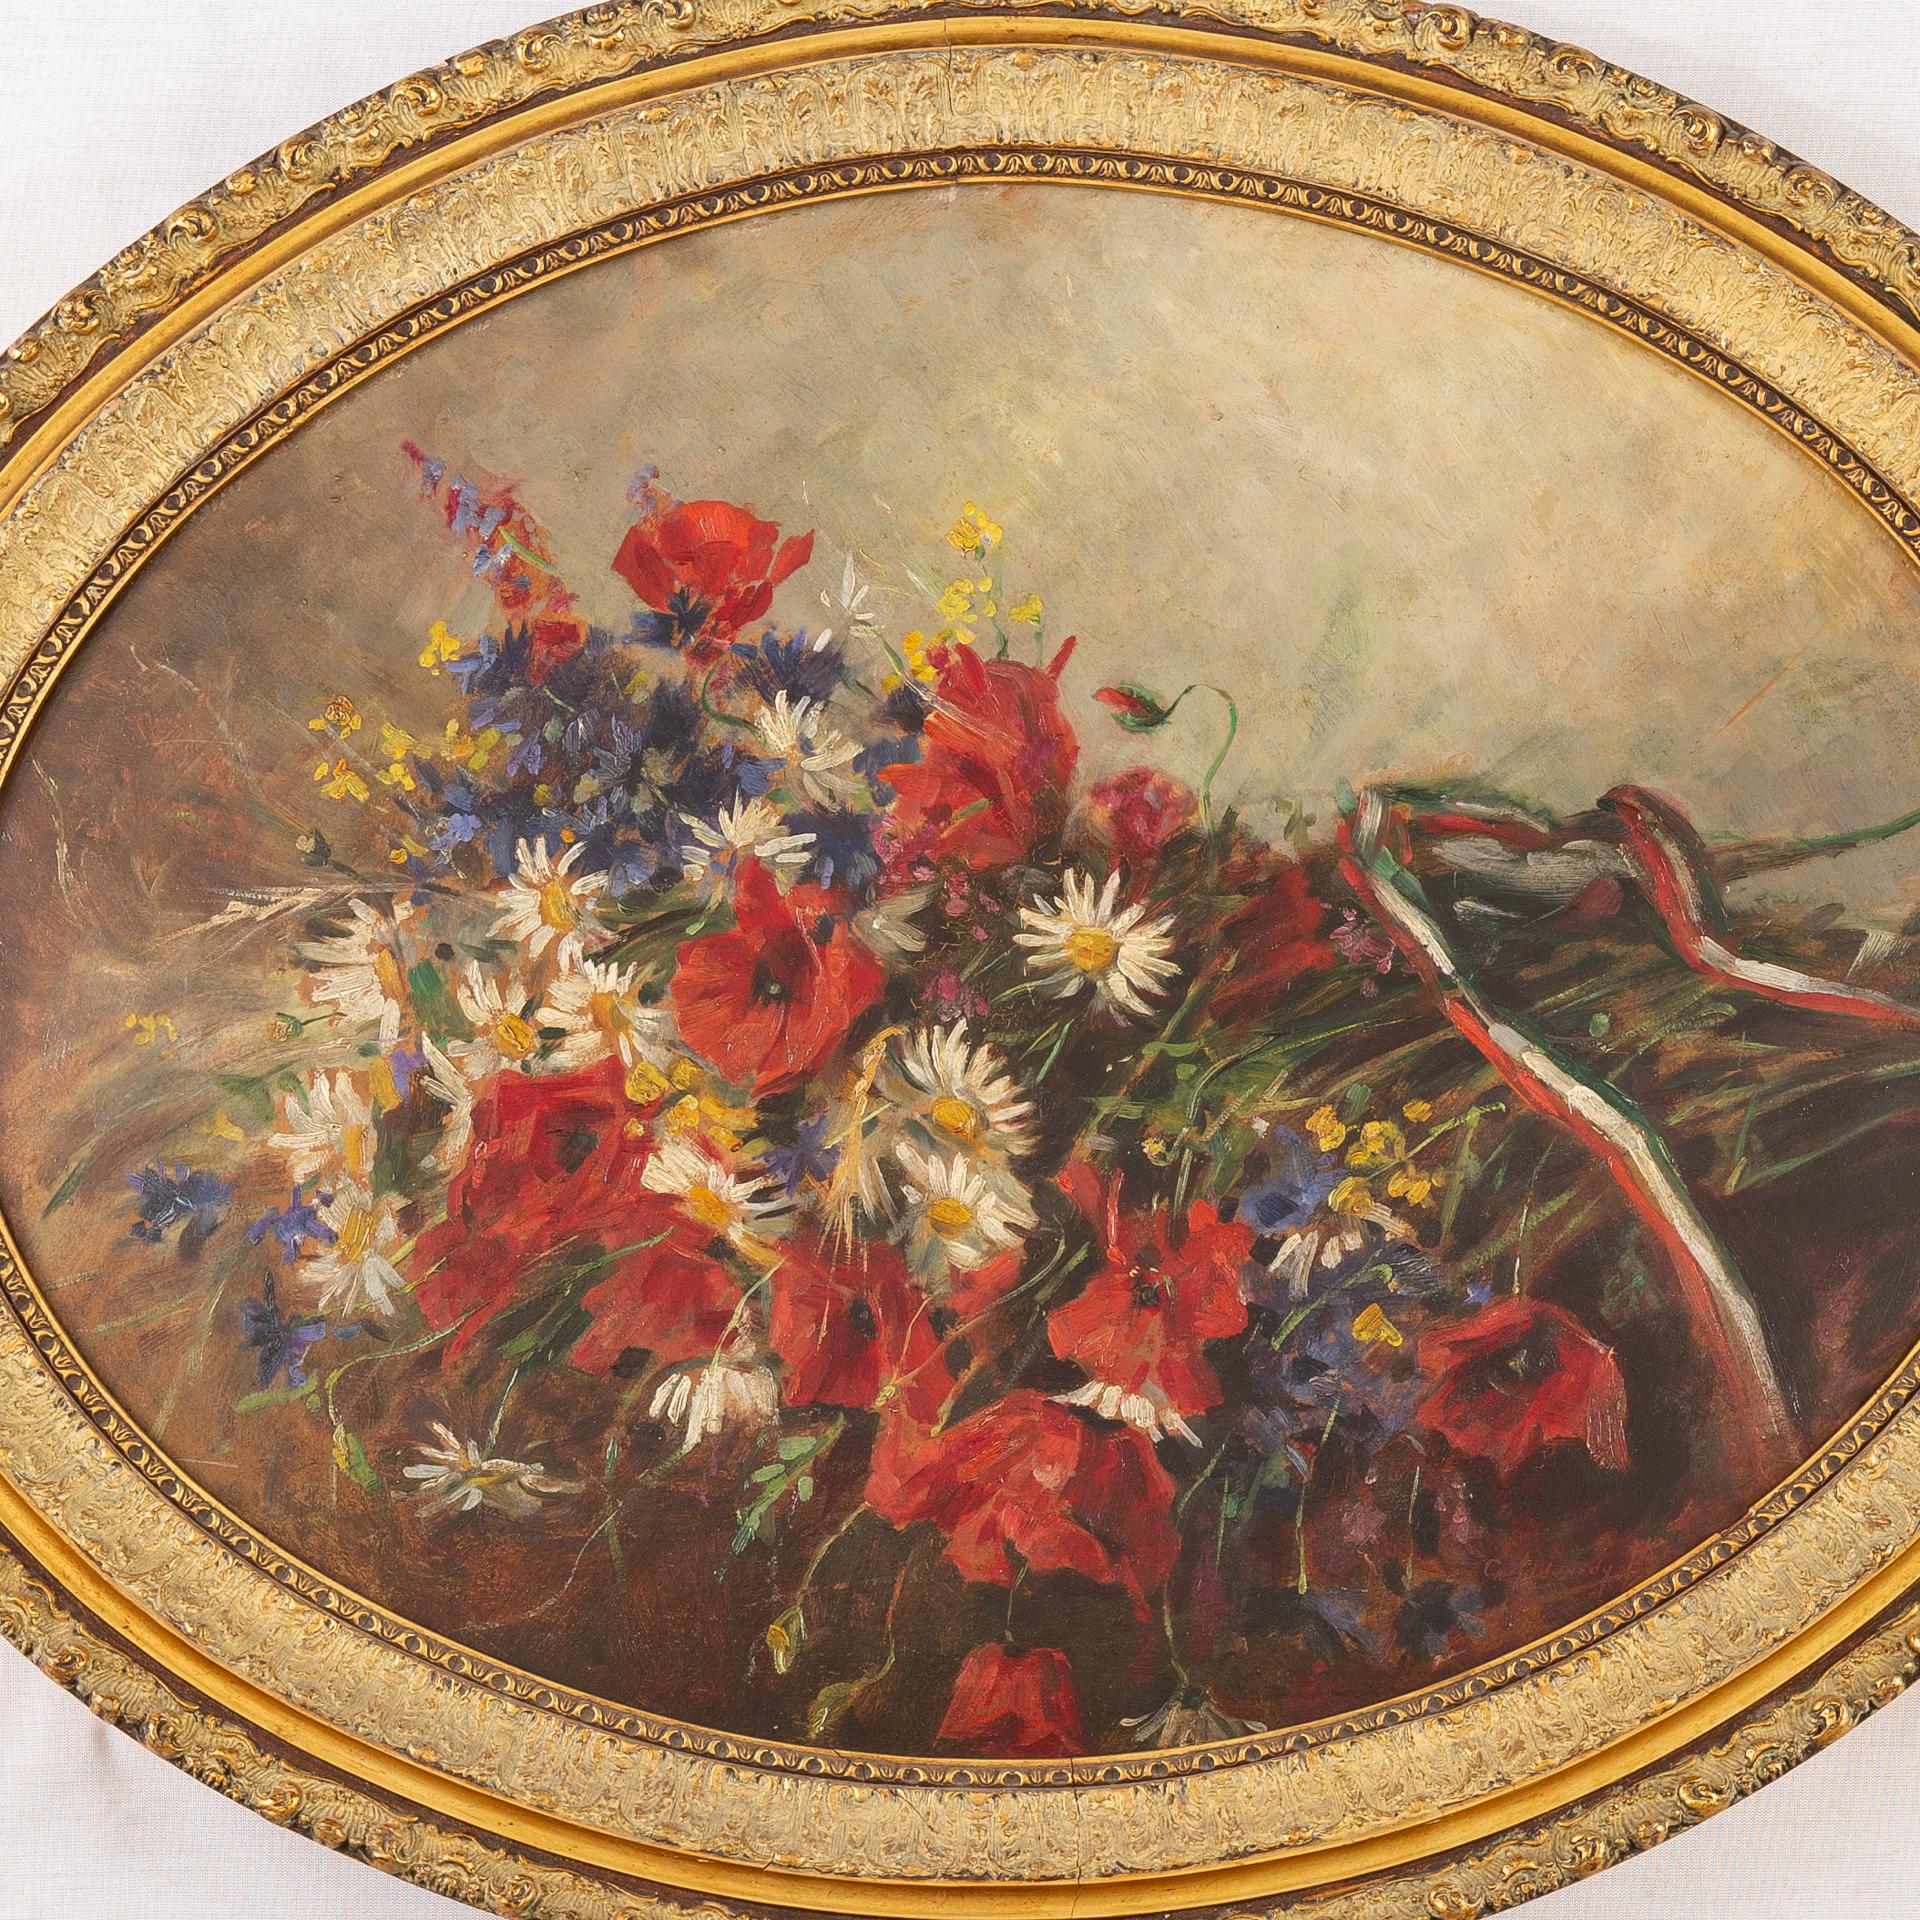 Oil on panel with a bouquet of wildflowers: poppies, cornflowers, daisies, tied by a small tricolor ribbon.
A festive summer in Your home ! with a very good price.
The signature is illegible.